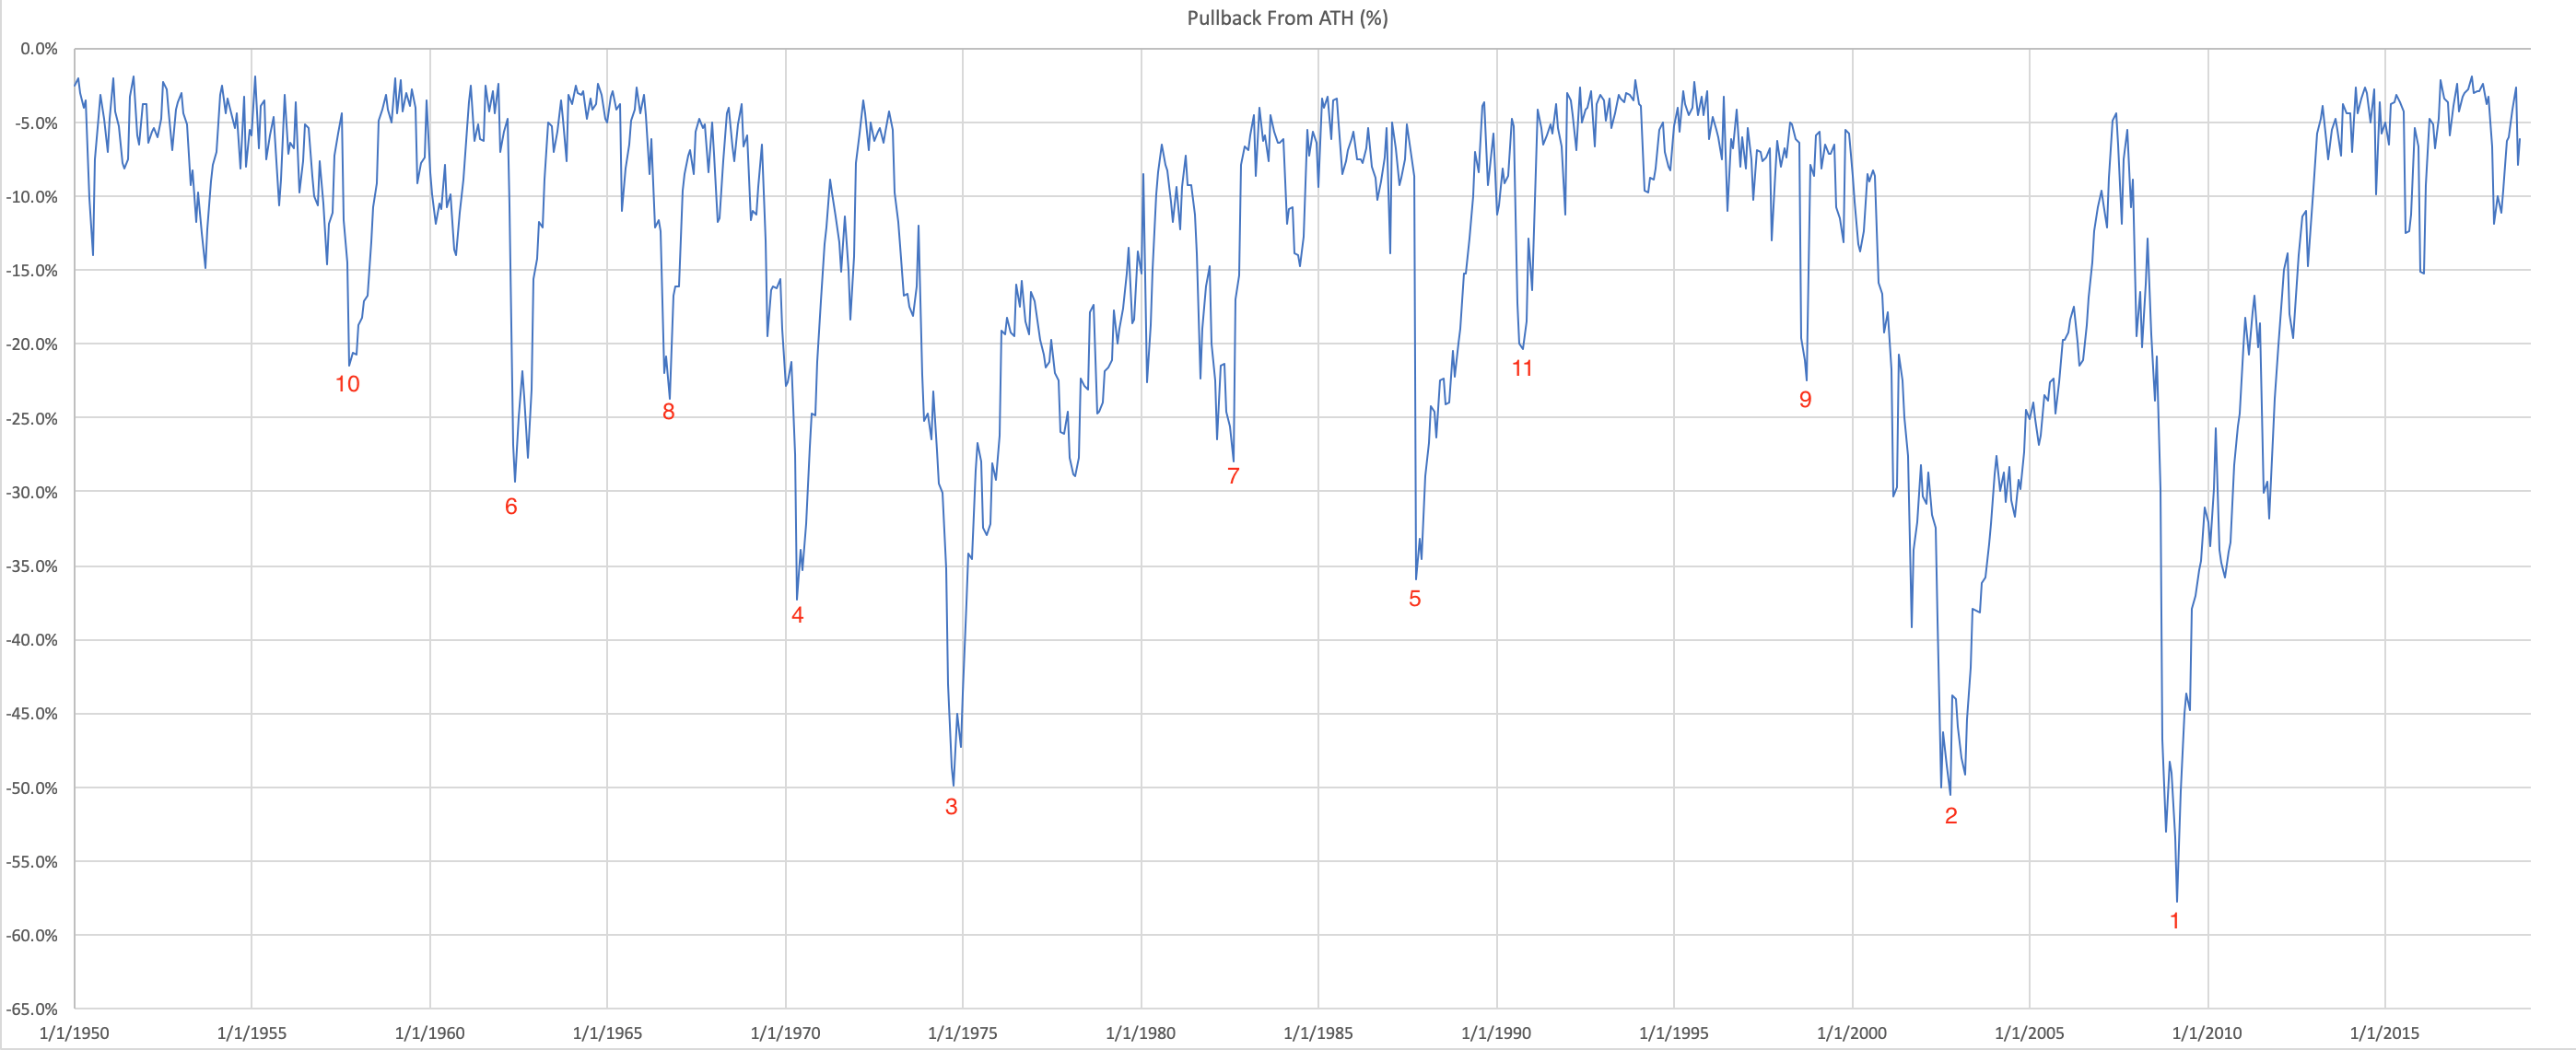 S&P 500 Pullbacks from ATHs 1950-2018